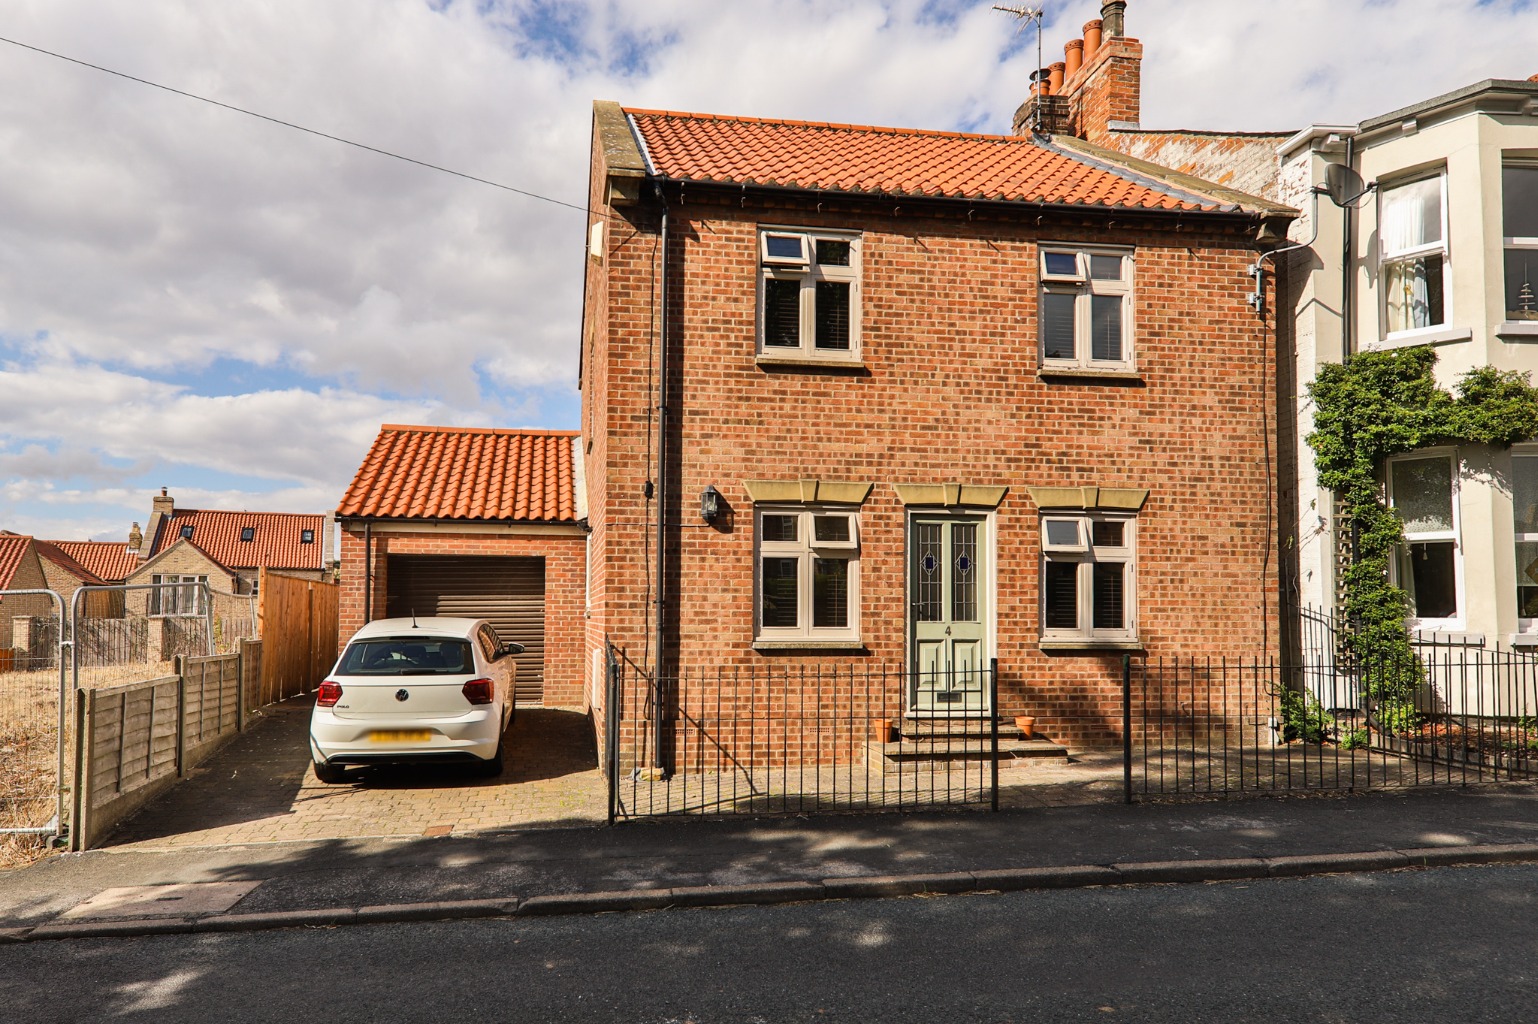 3 bed detached house for sale in Ratten Row, York, YO43